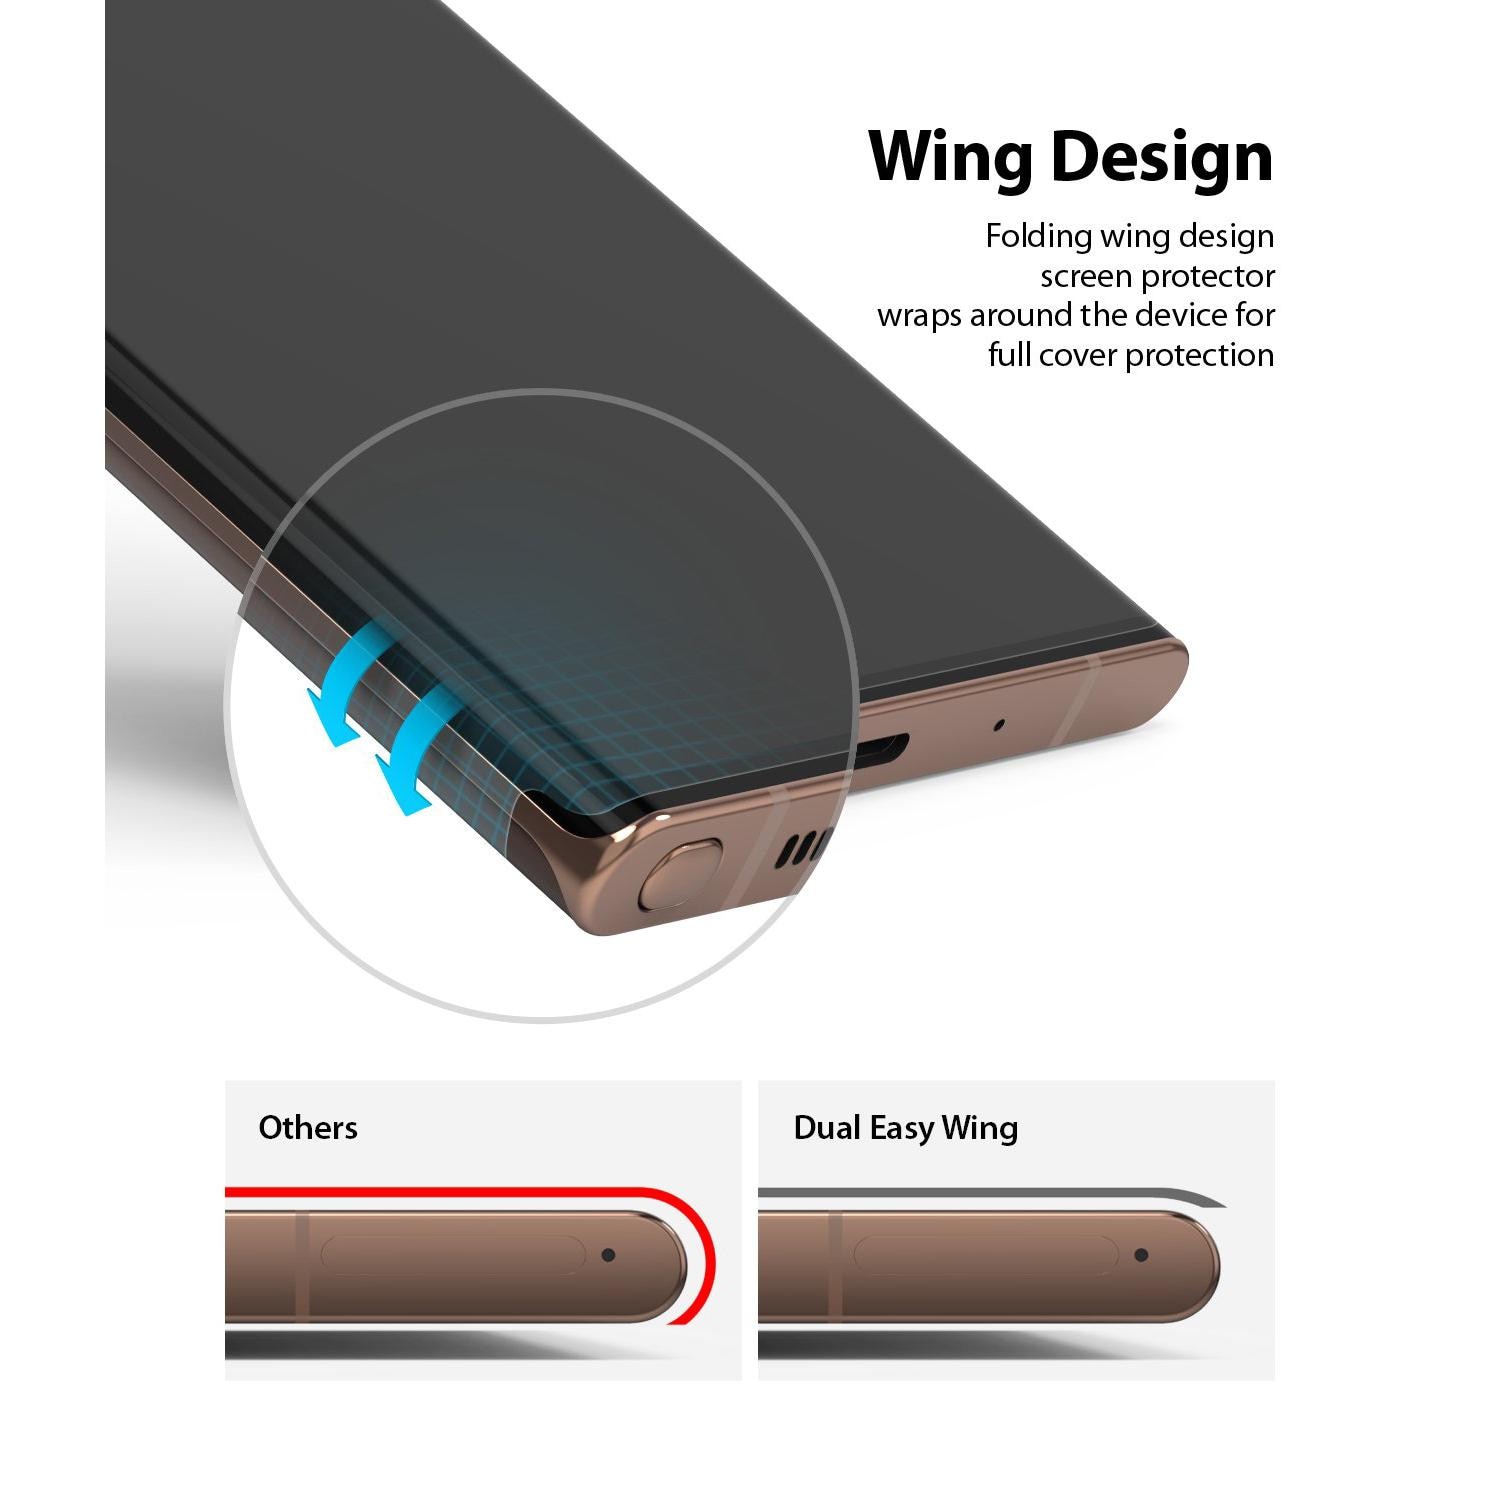 Dual Easy Wing Screen Protector Galaxy Note 20 Ultra (2-pack)